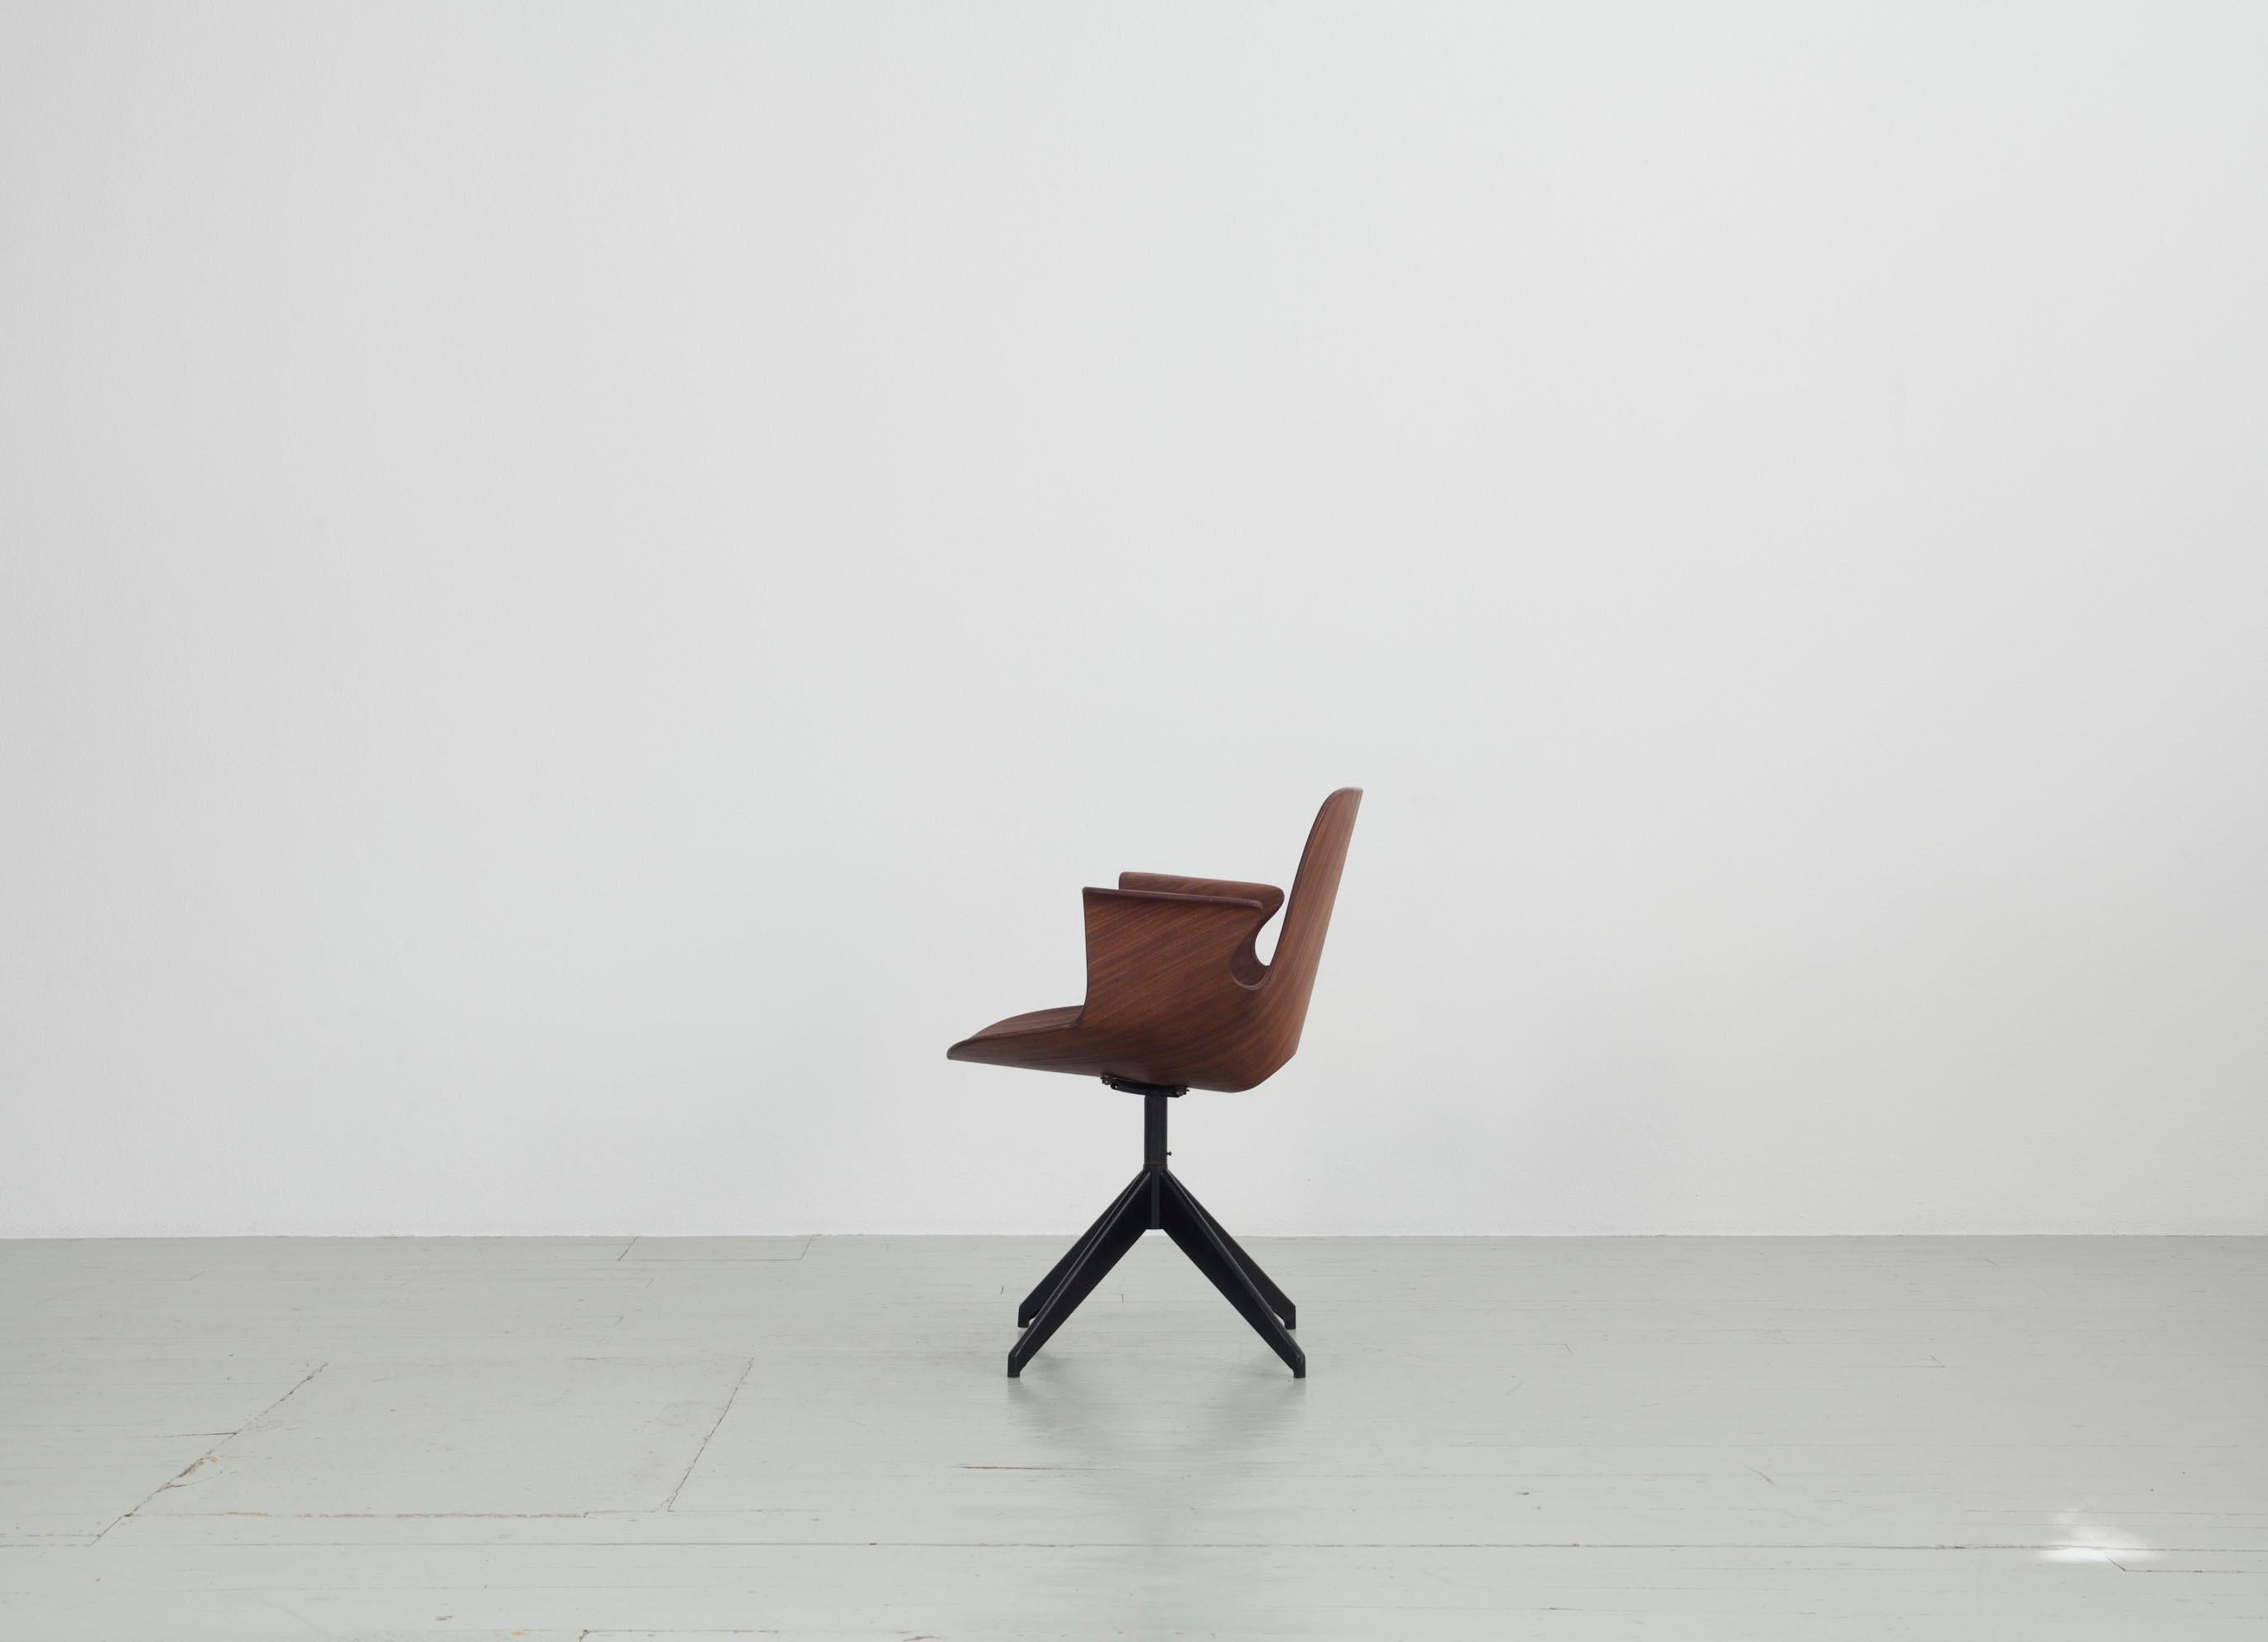 This 1950s swivel office chair “Medea” was designed by Vittorio Nobili and manufactured by Fratelli Tagliabue in Meda, Italy. The teak plywood seat swivels in all directions on a dark iron frame, making it an ideal office chair. In addition, it